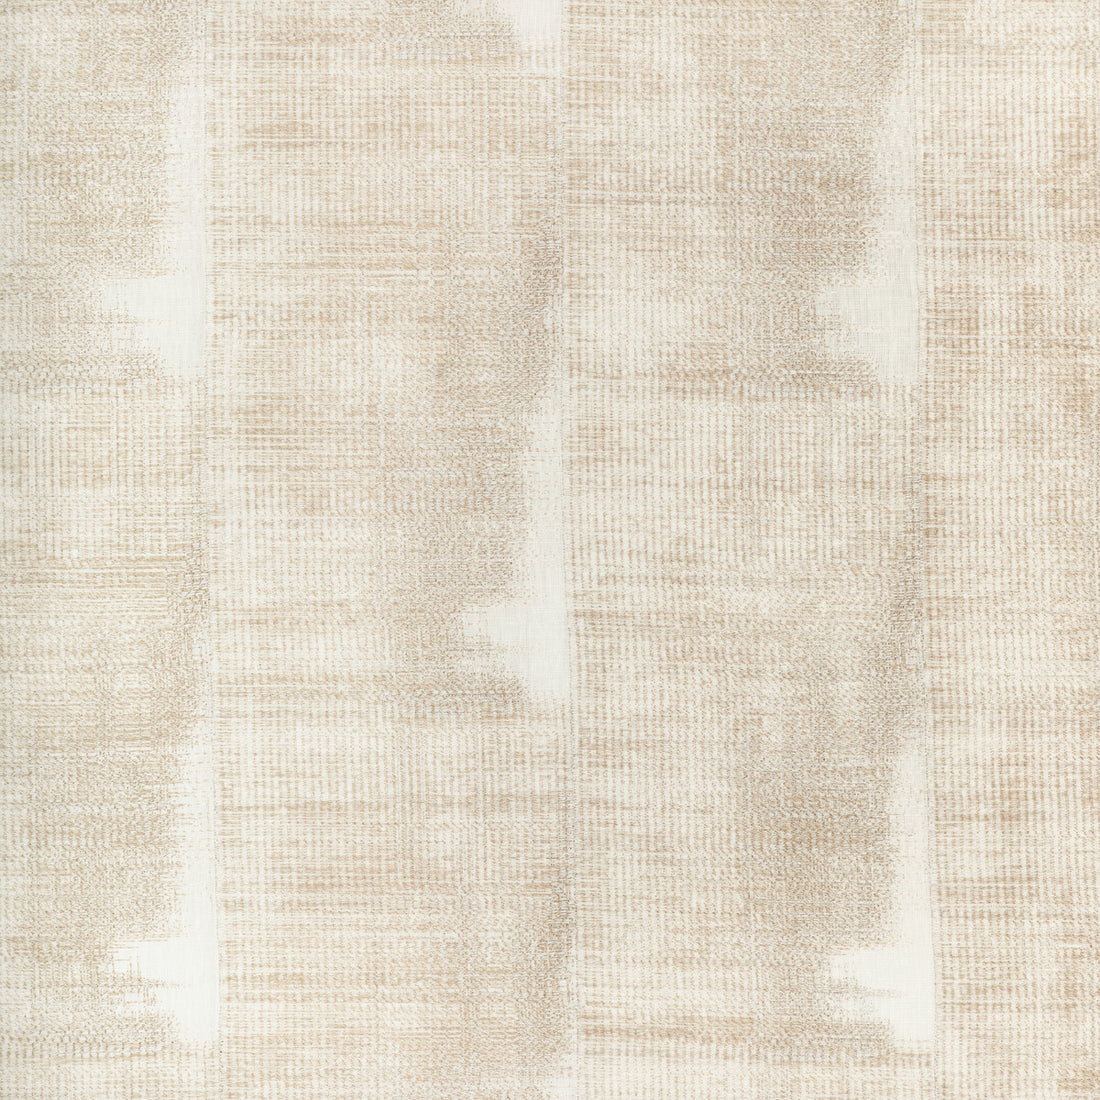 Etched fabric in champagne color - pattern 36395.16.0 - by Kravet Couture in the Barbara Barry Ojai collection